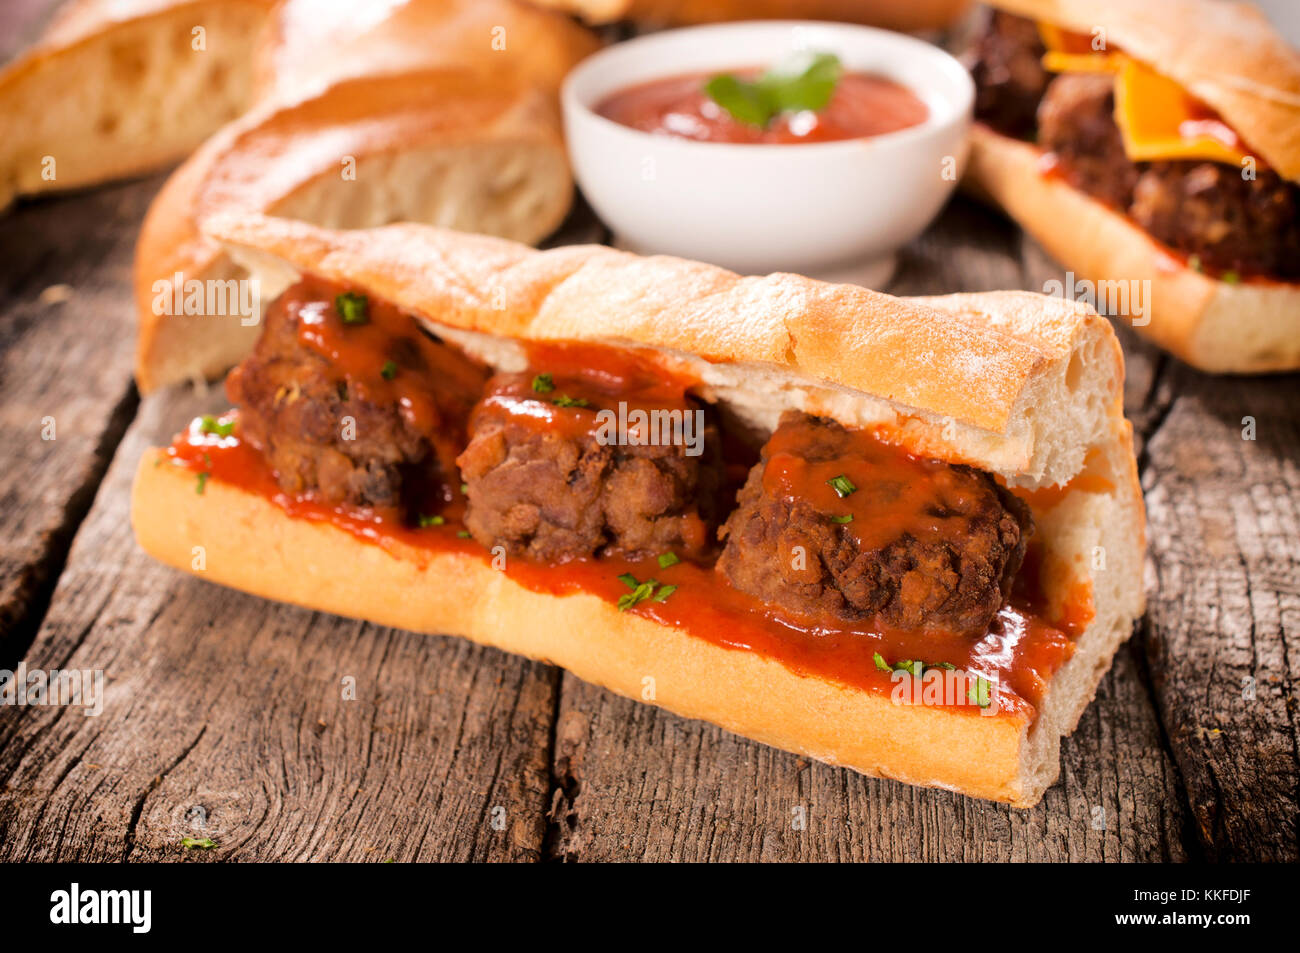 Gourment sandwich with meat balls and tomato sauce Stock Photo